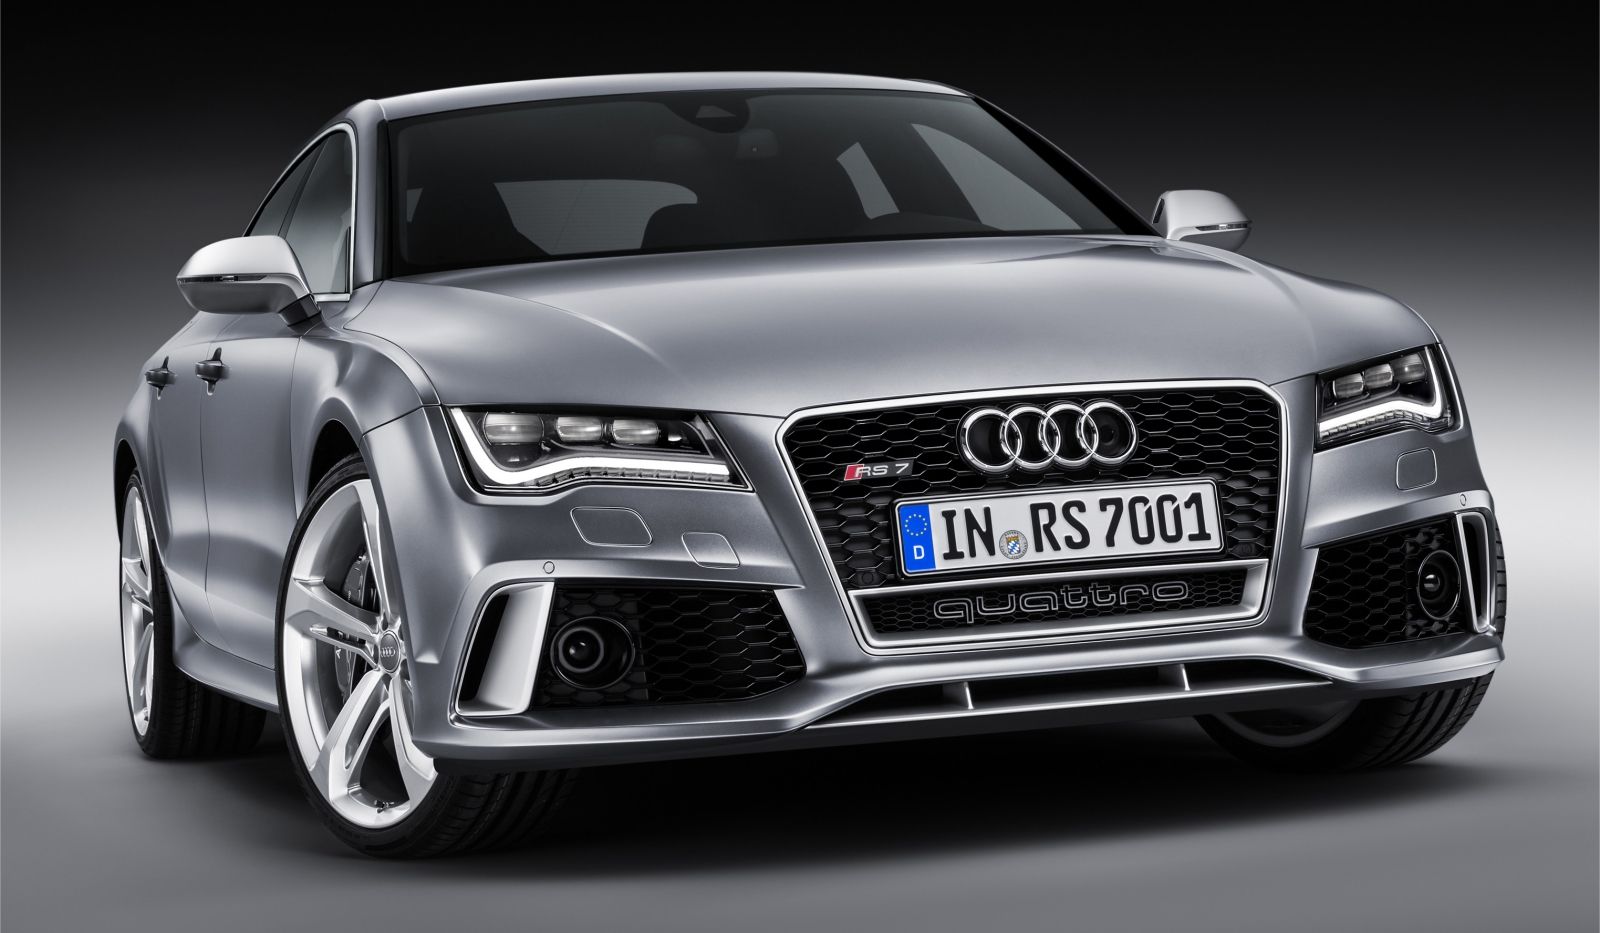 Car Wallpaper for the Week: 2014 Audi RS7 Sportback. AutoGeeze. Latest Sport Car News Insurance Wallpaper Rentals Prices Parts and Reviews